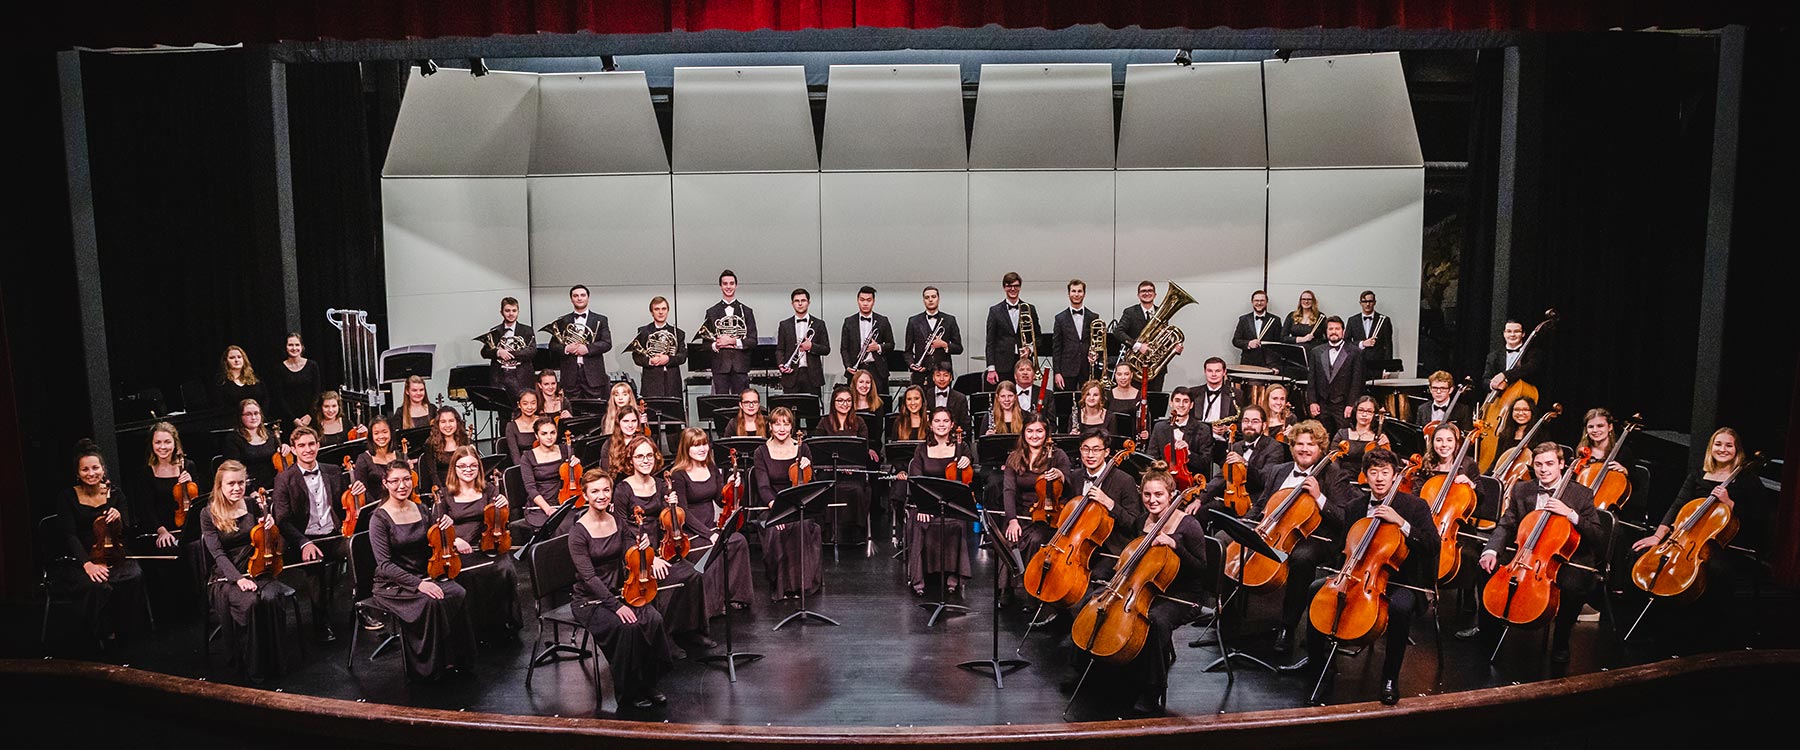 A professional photo of the 2018-19 Whitworth Symphony Orchestra on stage in concert attire.